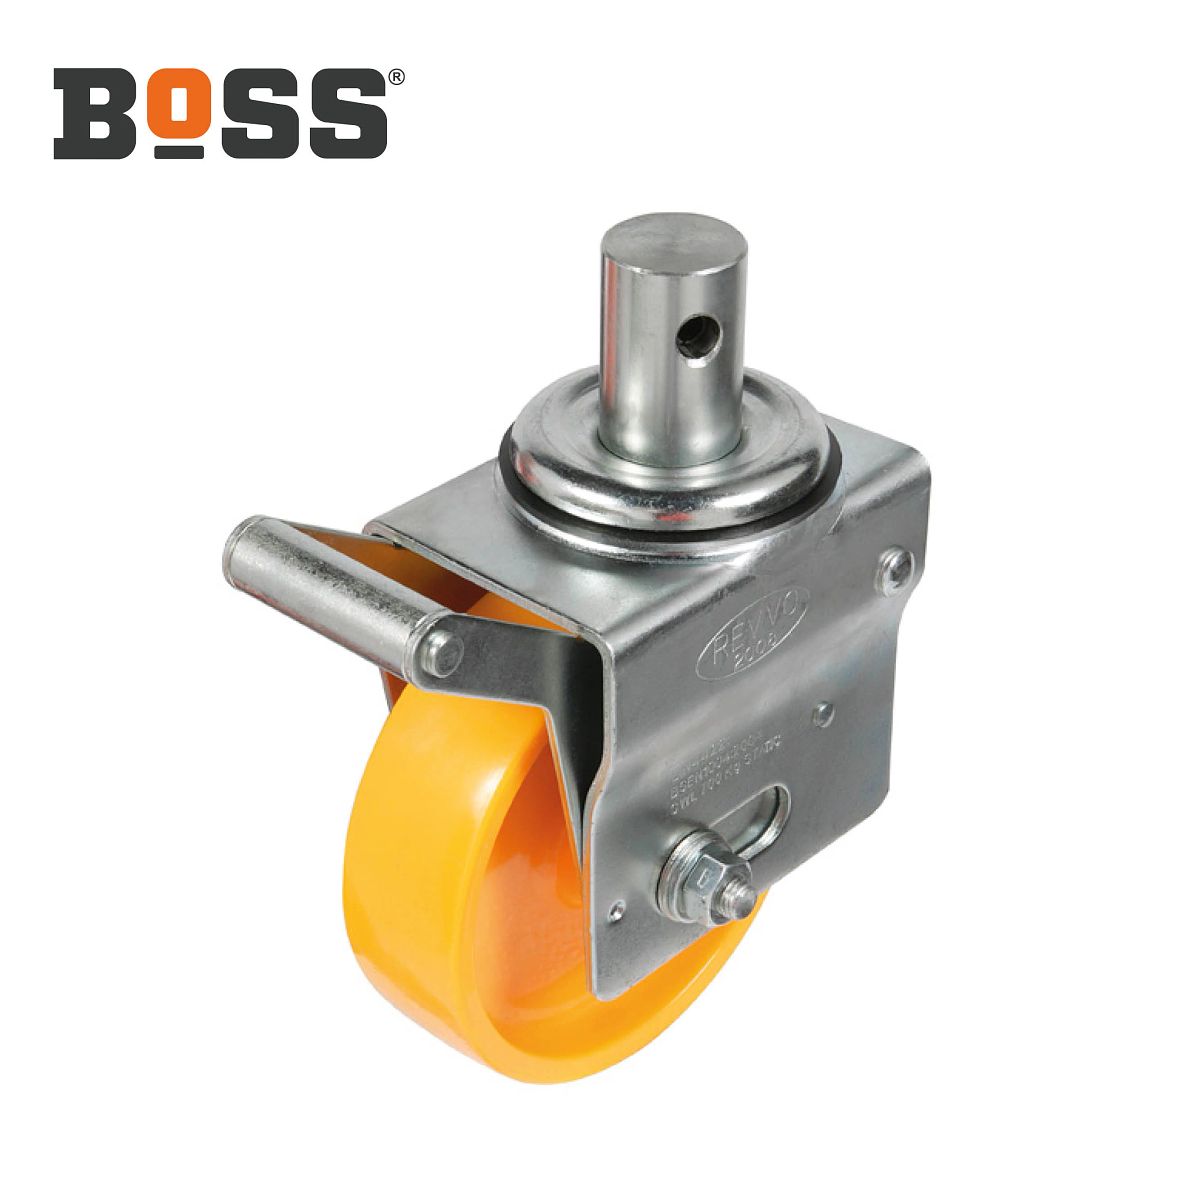 | 32842300 | Access BoSS Towers Components BoSS